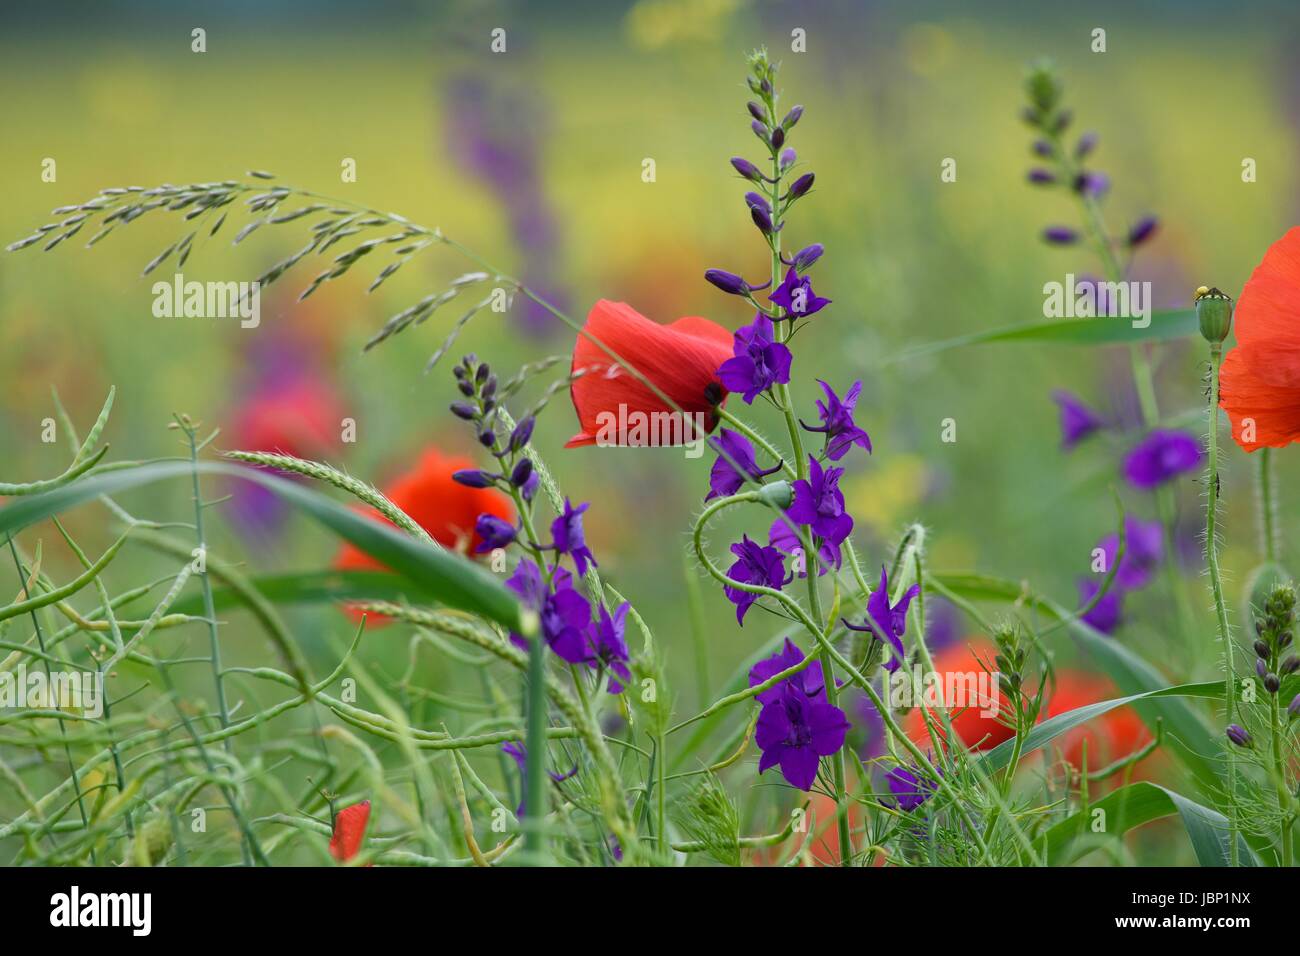 Wild flowers in different colors Stock Photo